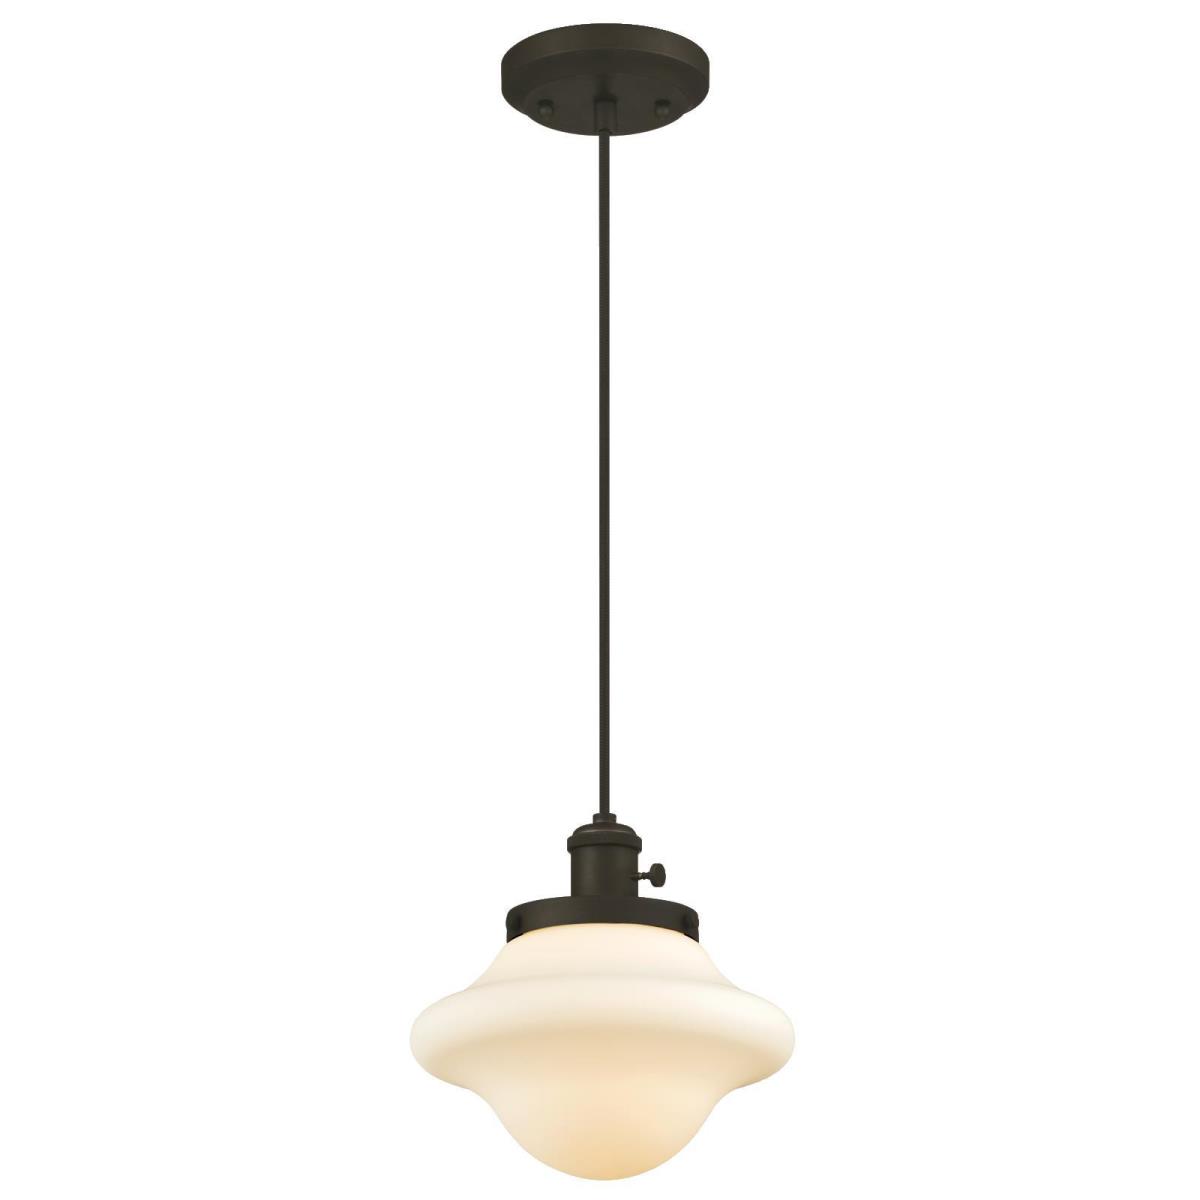 1 Light Mini Pendant with Turn Knob Oil Rubbed Bronze Finish with Frosted Opal Glass